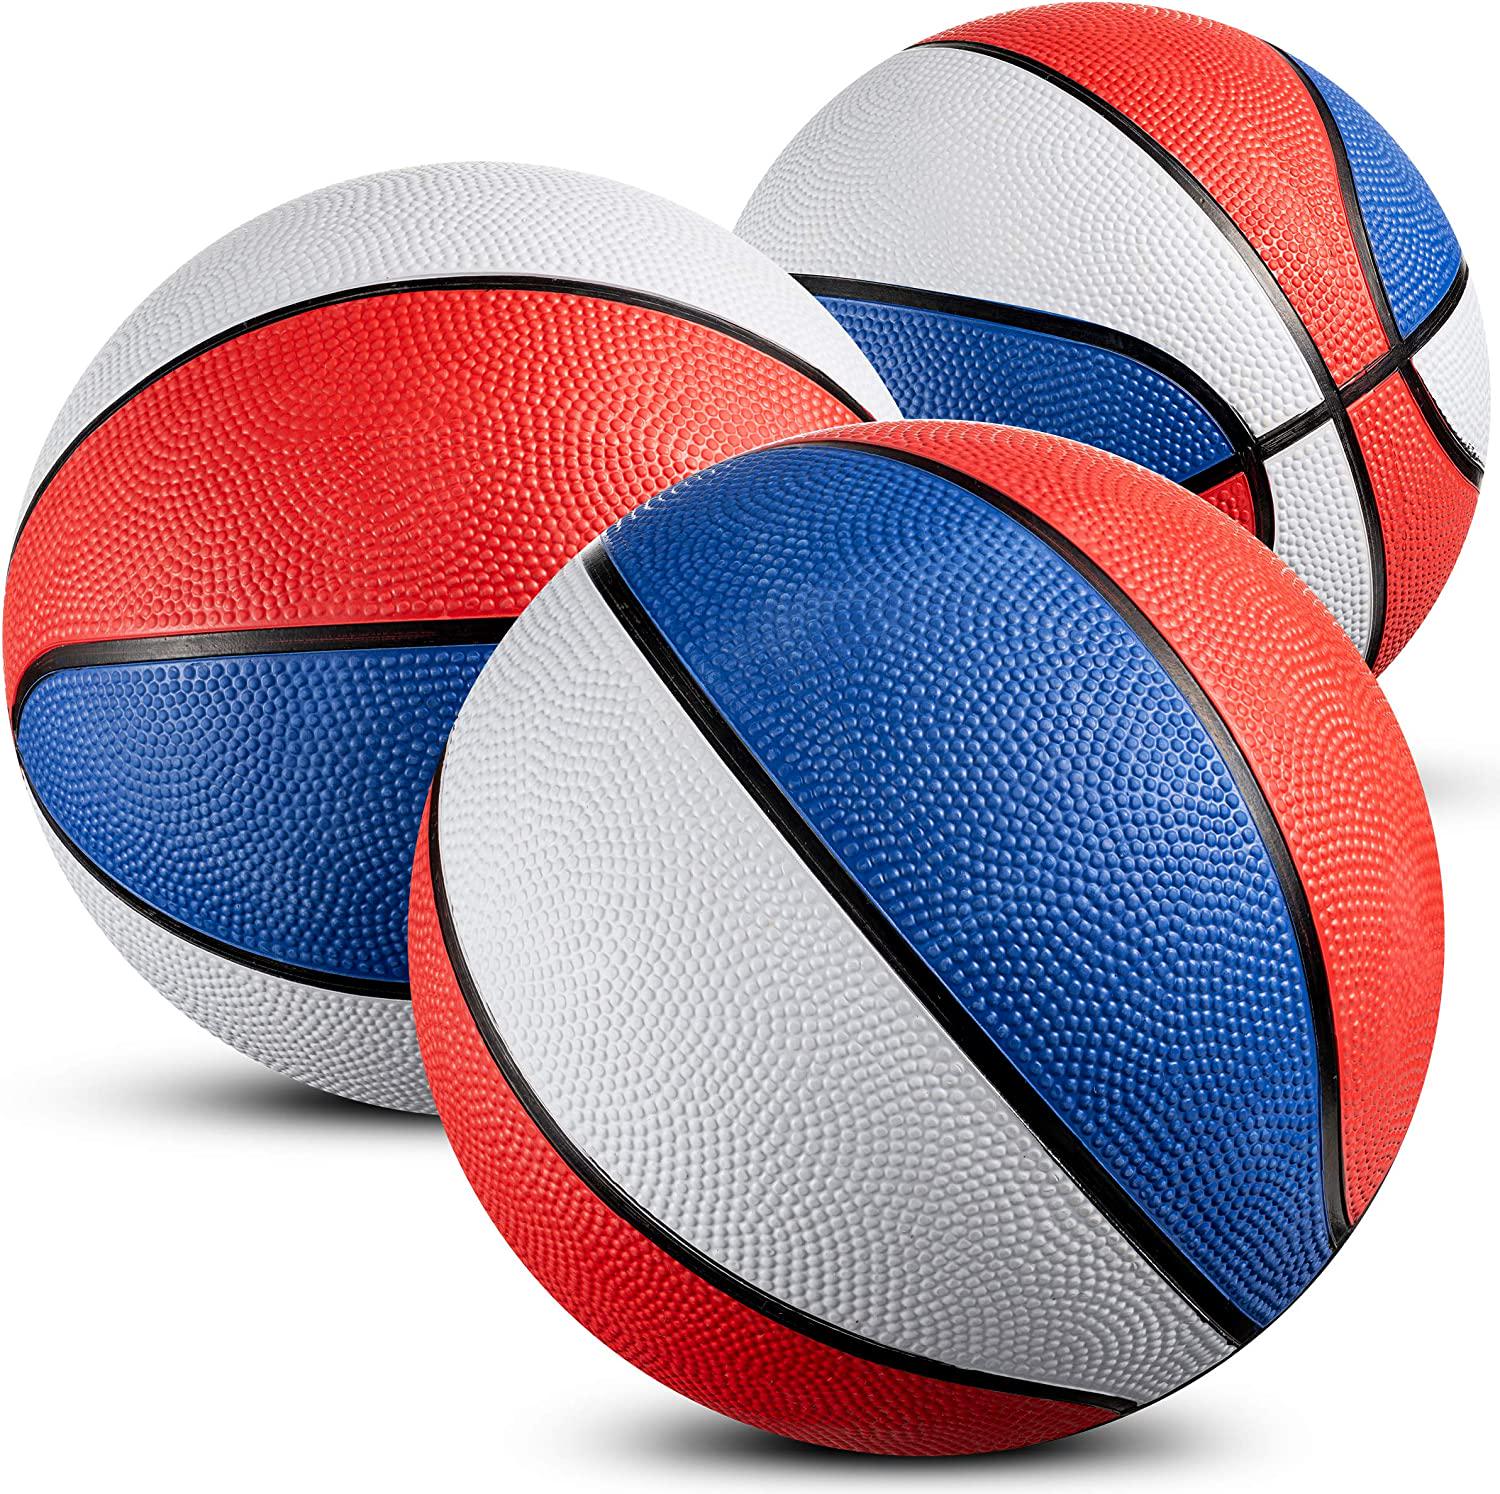 Bedwina, Mini Basketballs - (7 Inch, Size 3) Pack of 3 - Mini Hoop Basketball Set for Indoor, Outdoor, Pool Parties, Small Hoops Basketball Game Party Favors for Kids Patriotic Red, White and Blue Colors